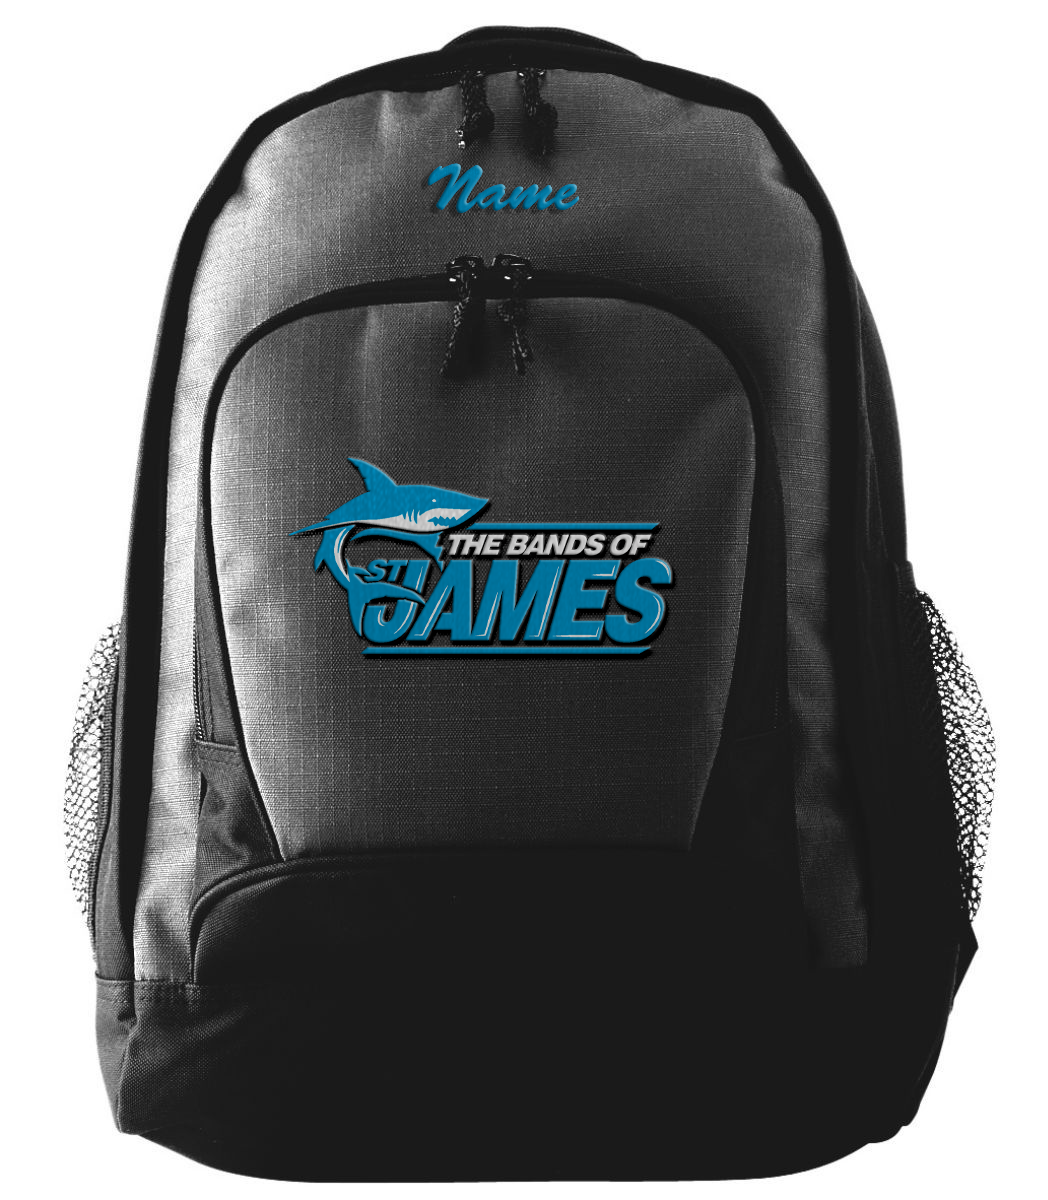 St. James Bands Embroidered Ripstop Backpack w/ Name & Logo